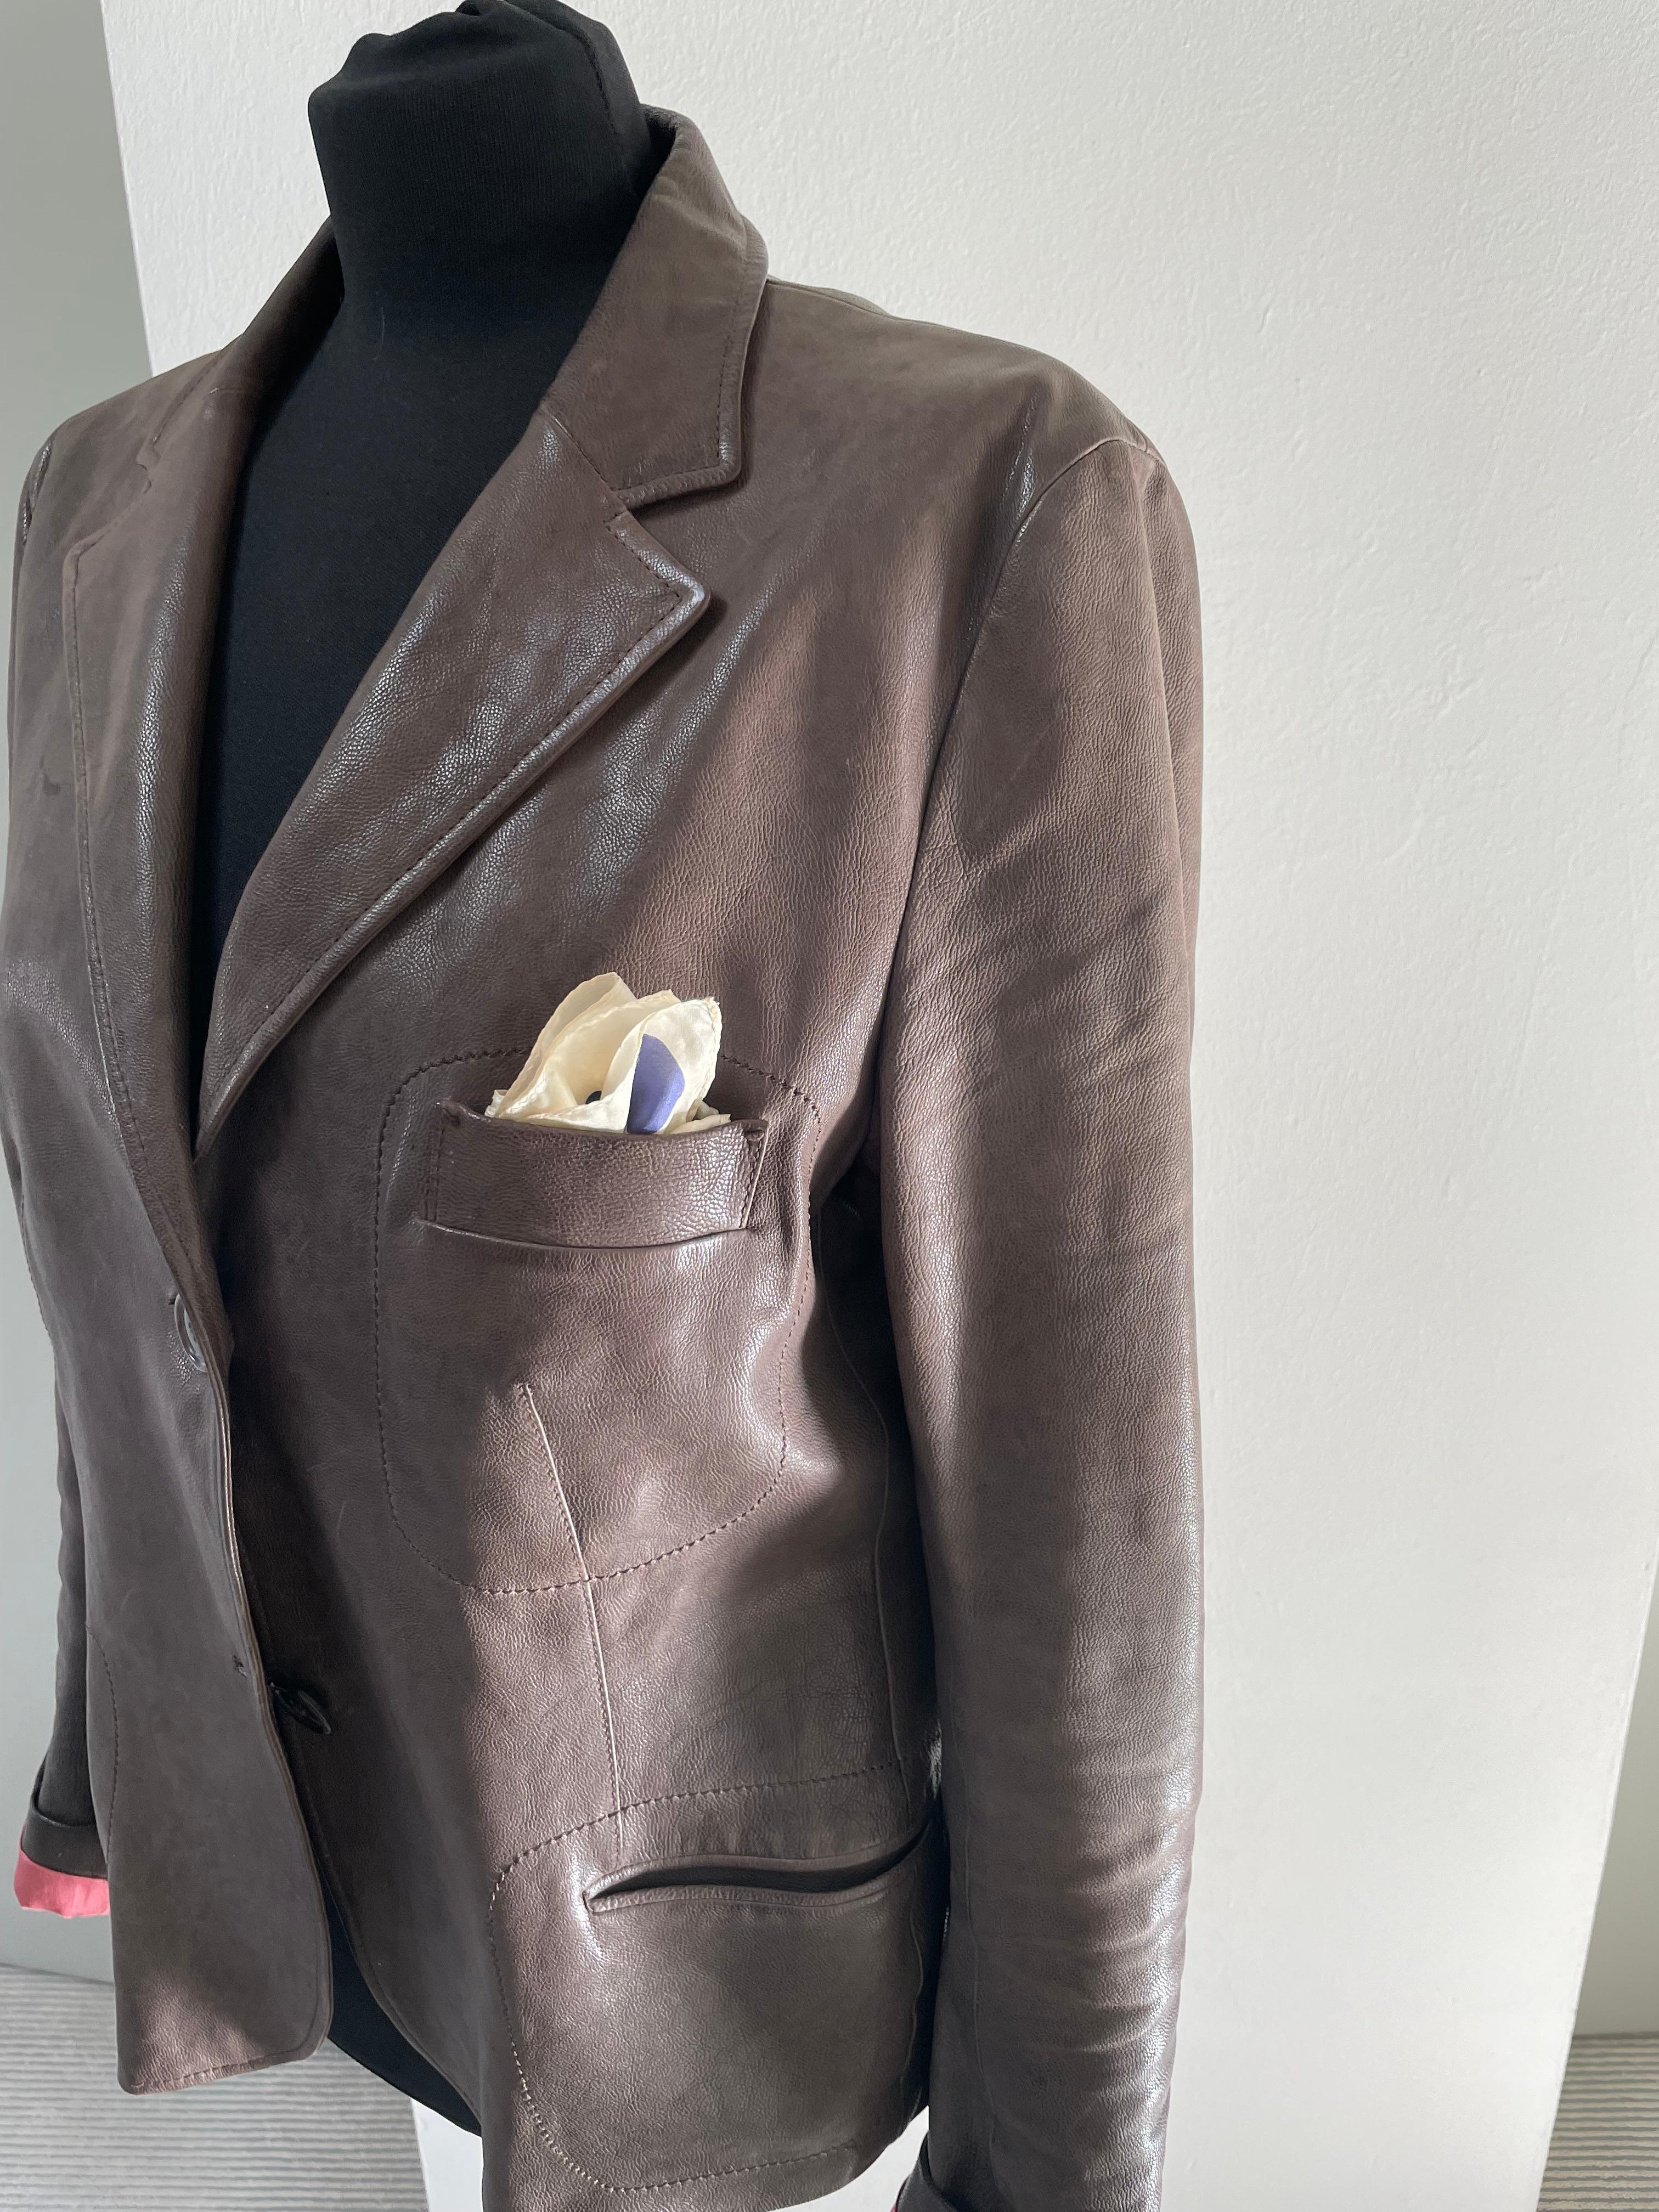  Smooth Leather Blazer by Jil Sander brown, pink lining size 44 In Good Condition For Sale In Stuttgart, DE